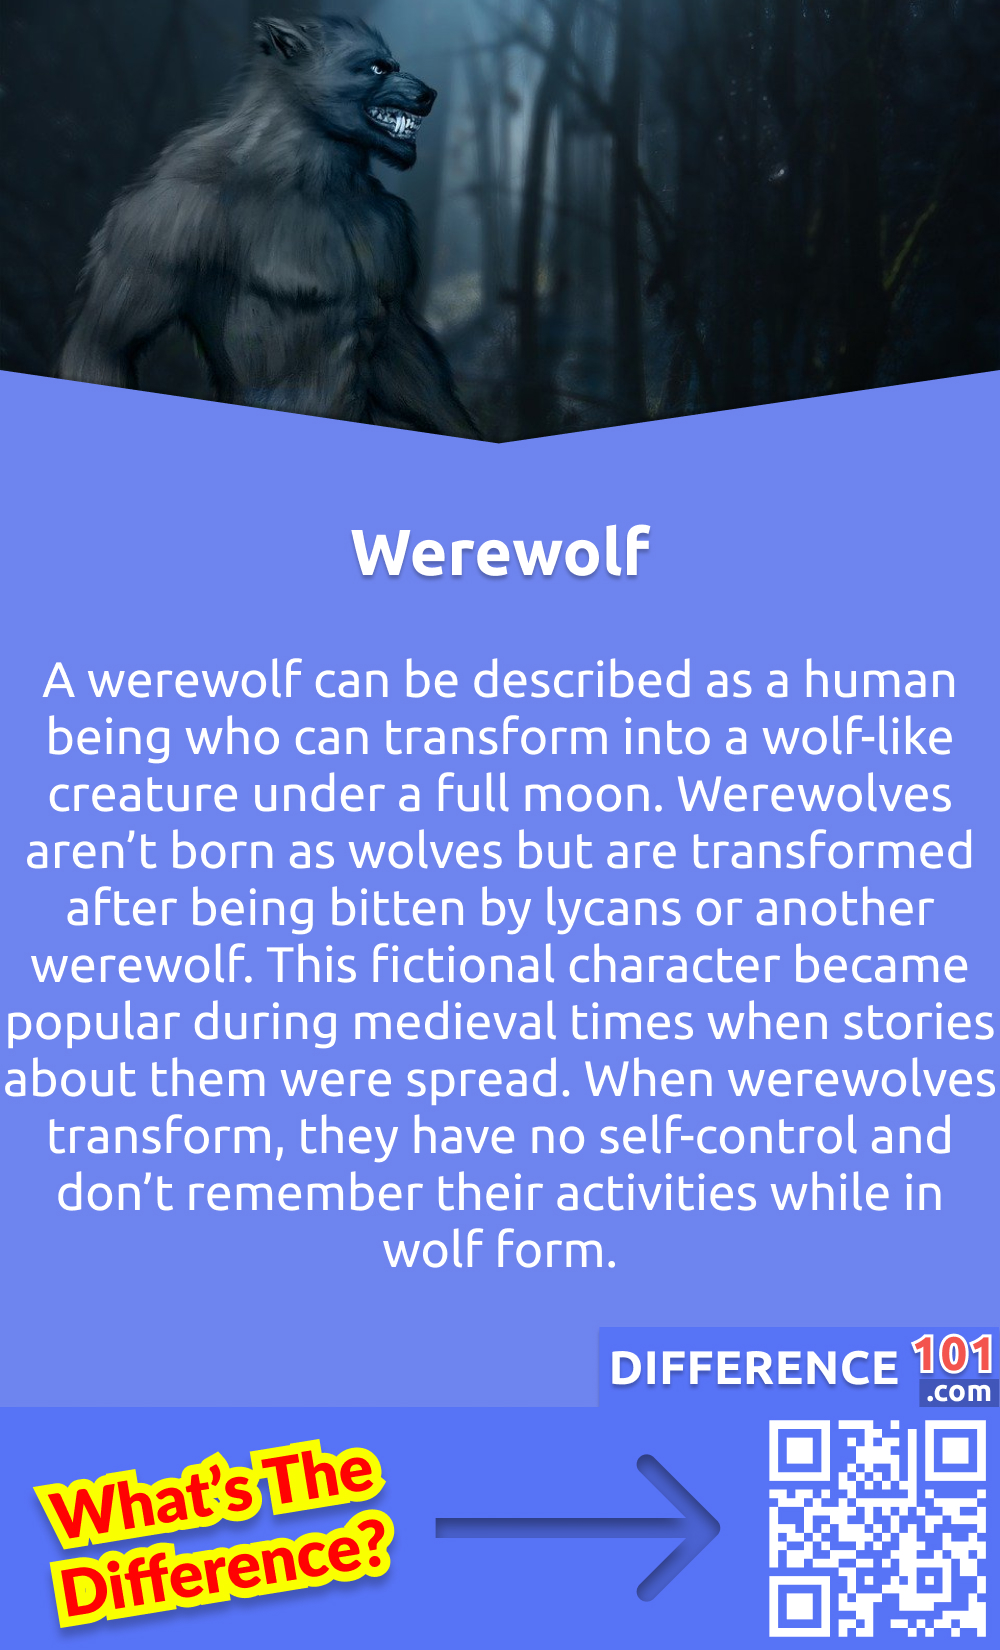 What Is a Werewolf? A werewolf can be described as a human being who can transform into a wolf-like creature under a full moon. Werewolves aren’t born as wolves but are transformed after being bitten by lycans or another werewolf. This fictional character became popular during medieval times when stories about them were spread. When werewolves transform, they have no self-control and don’t remember their activities while in wolf form.